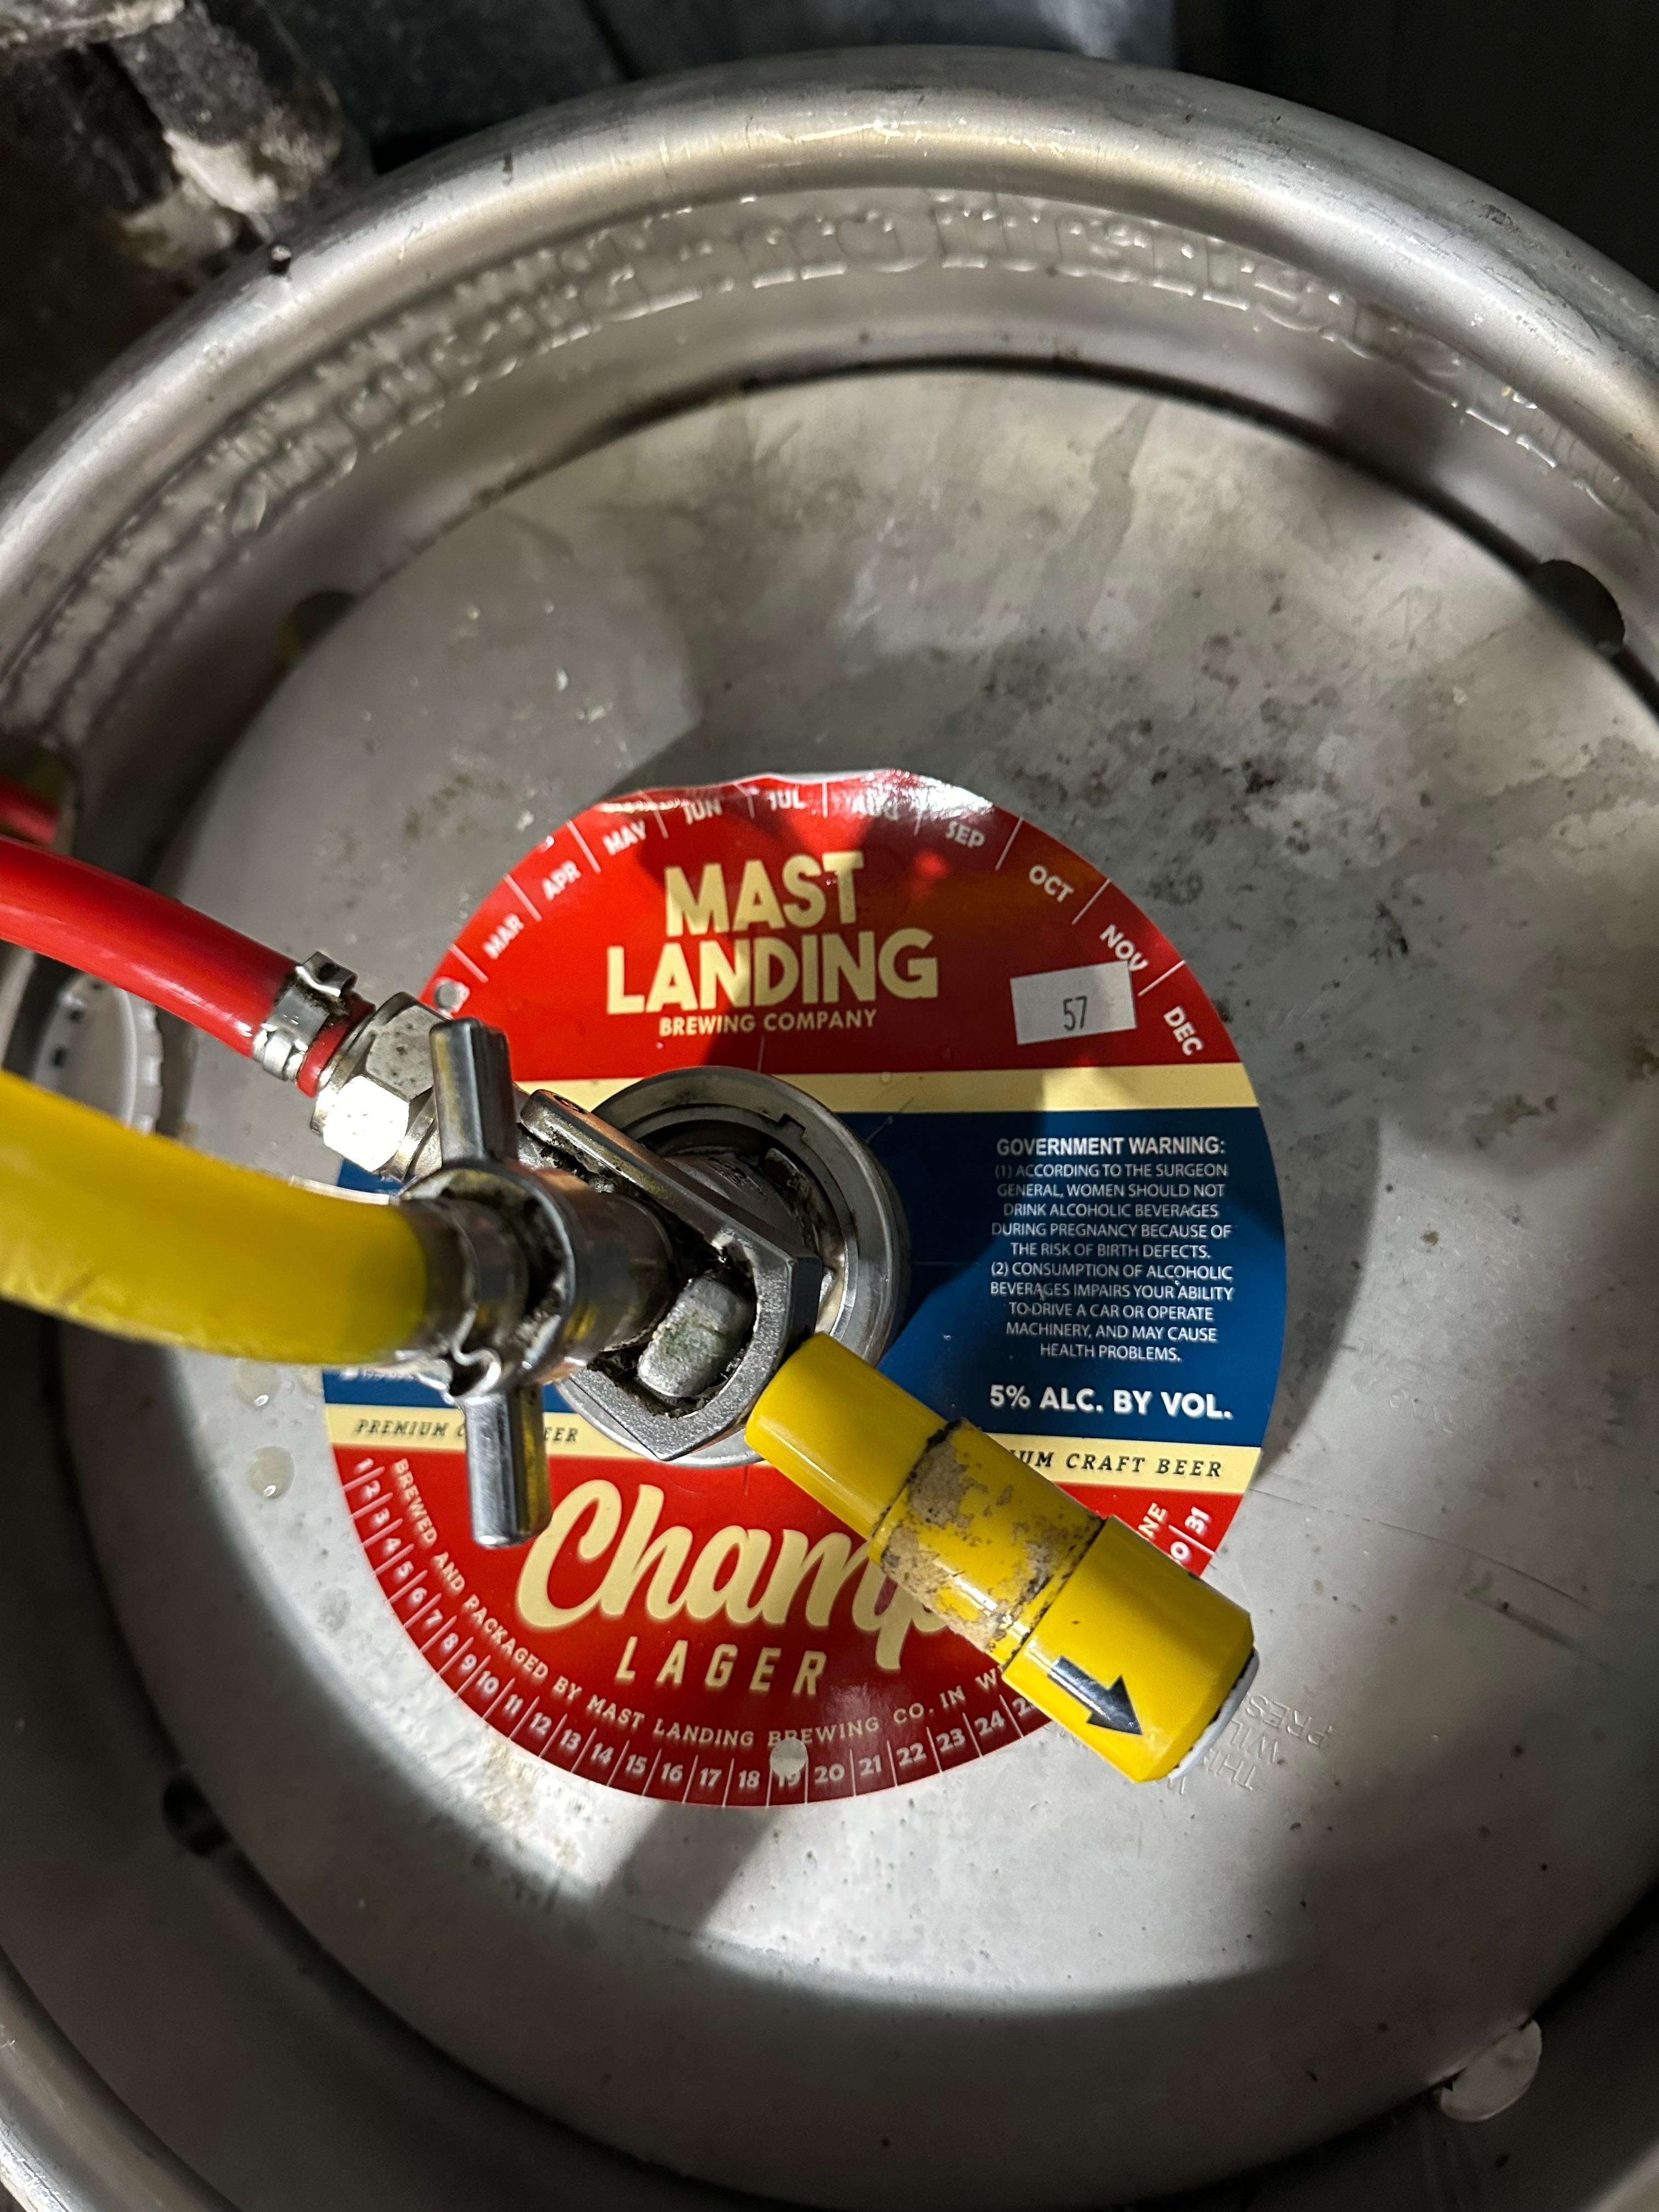 Champ Lager - Mast Landing Brewing Company